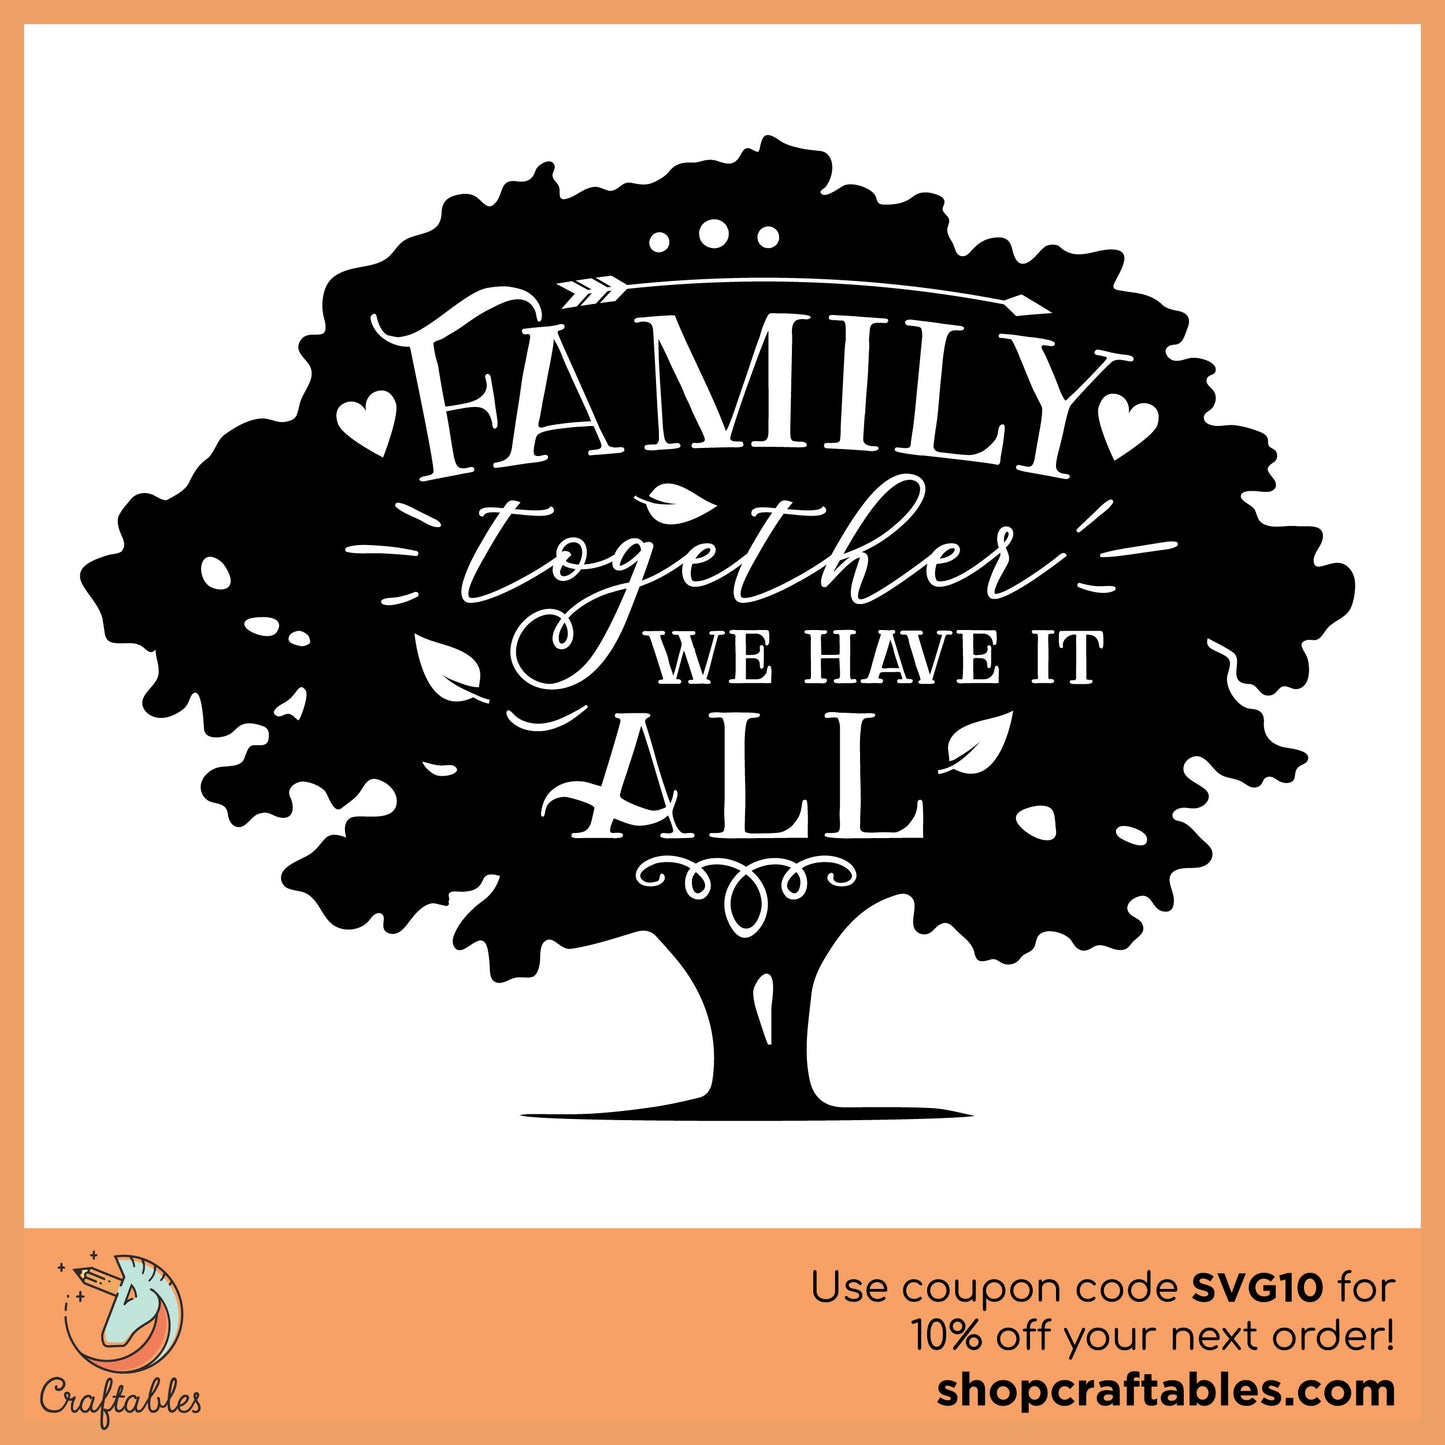 Free Family, Together We Have it All SVG Cut File